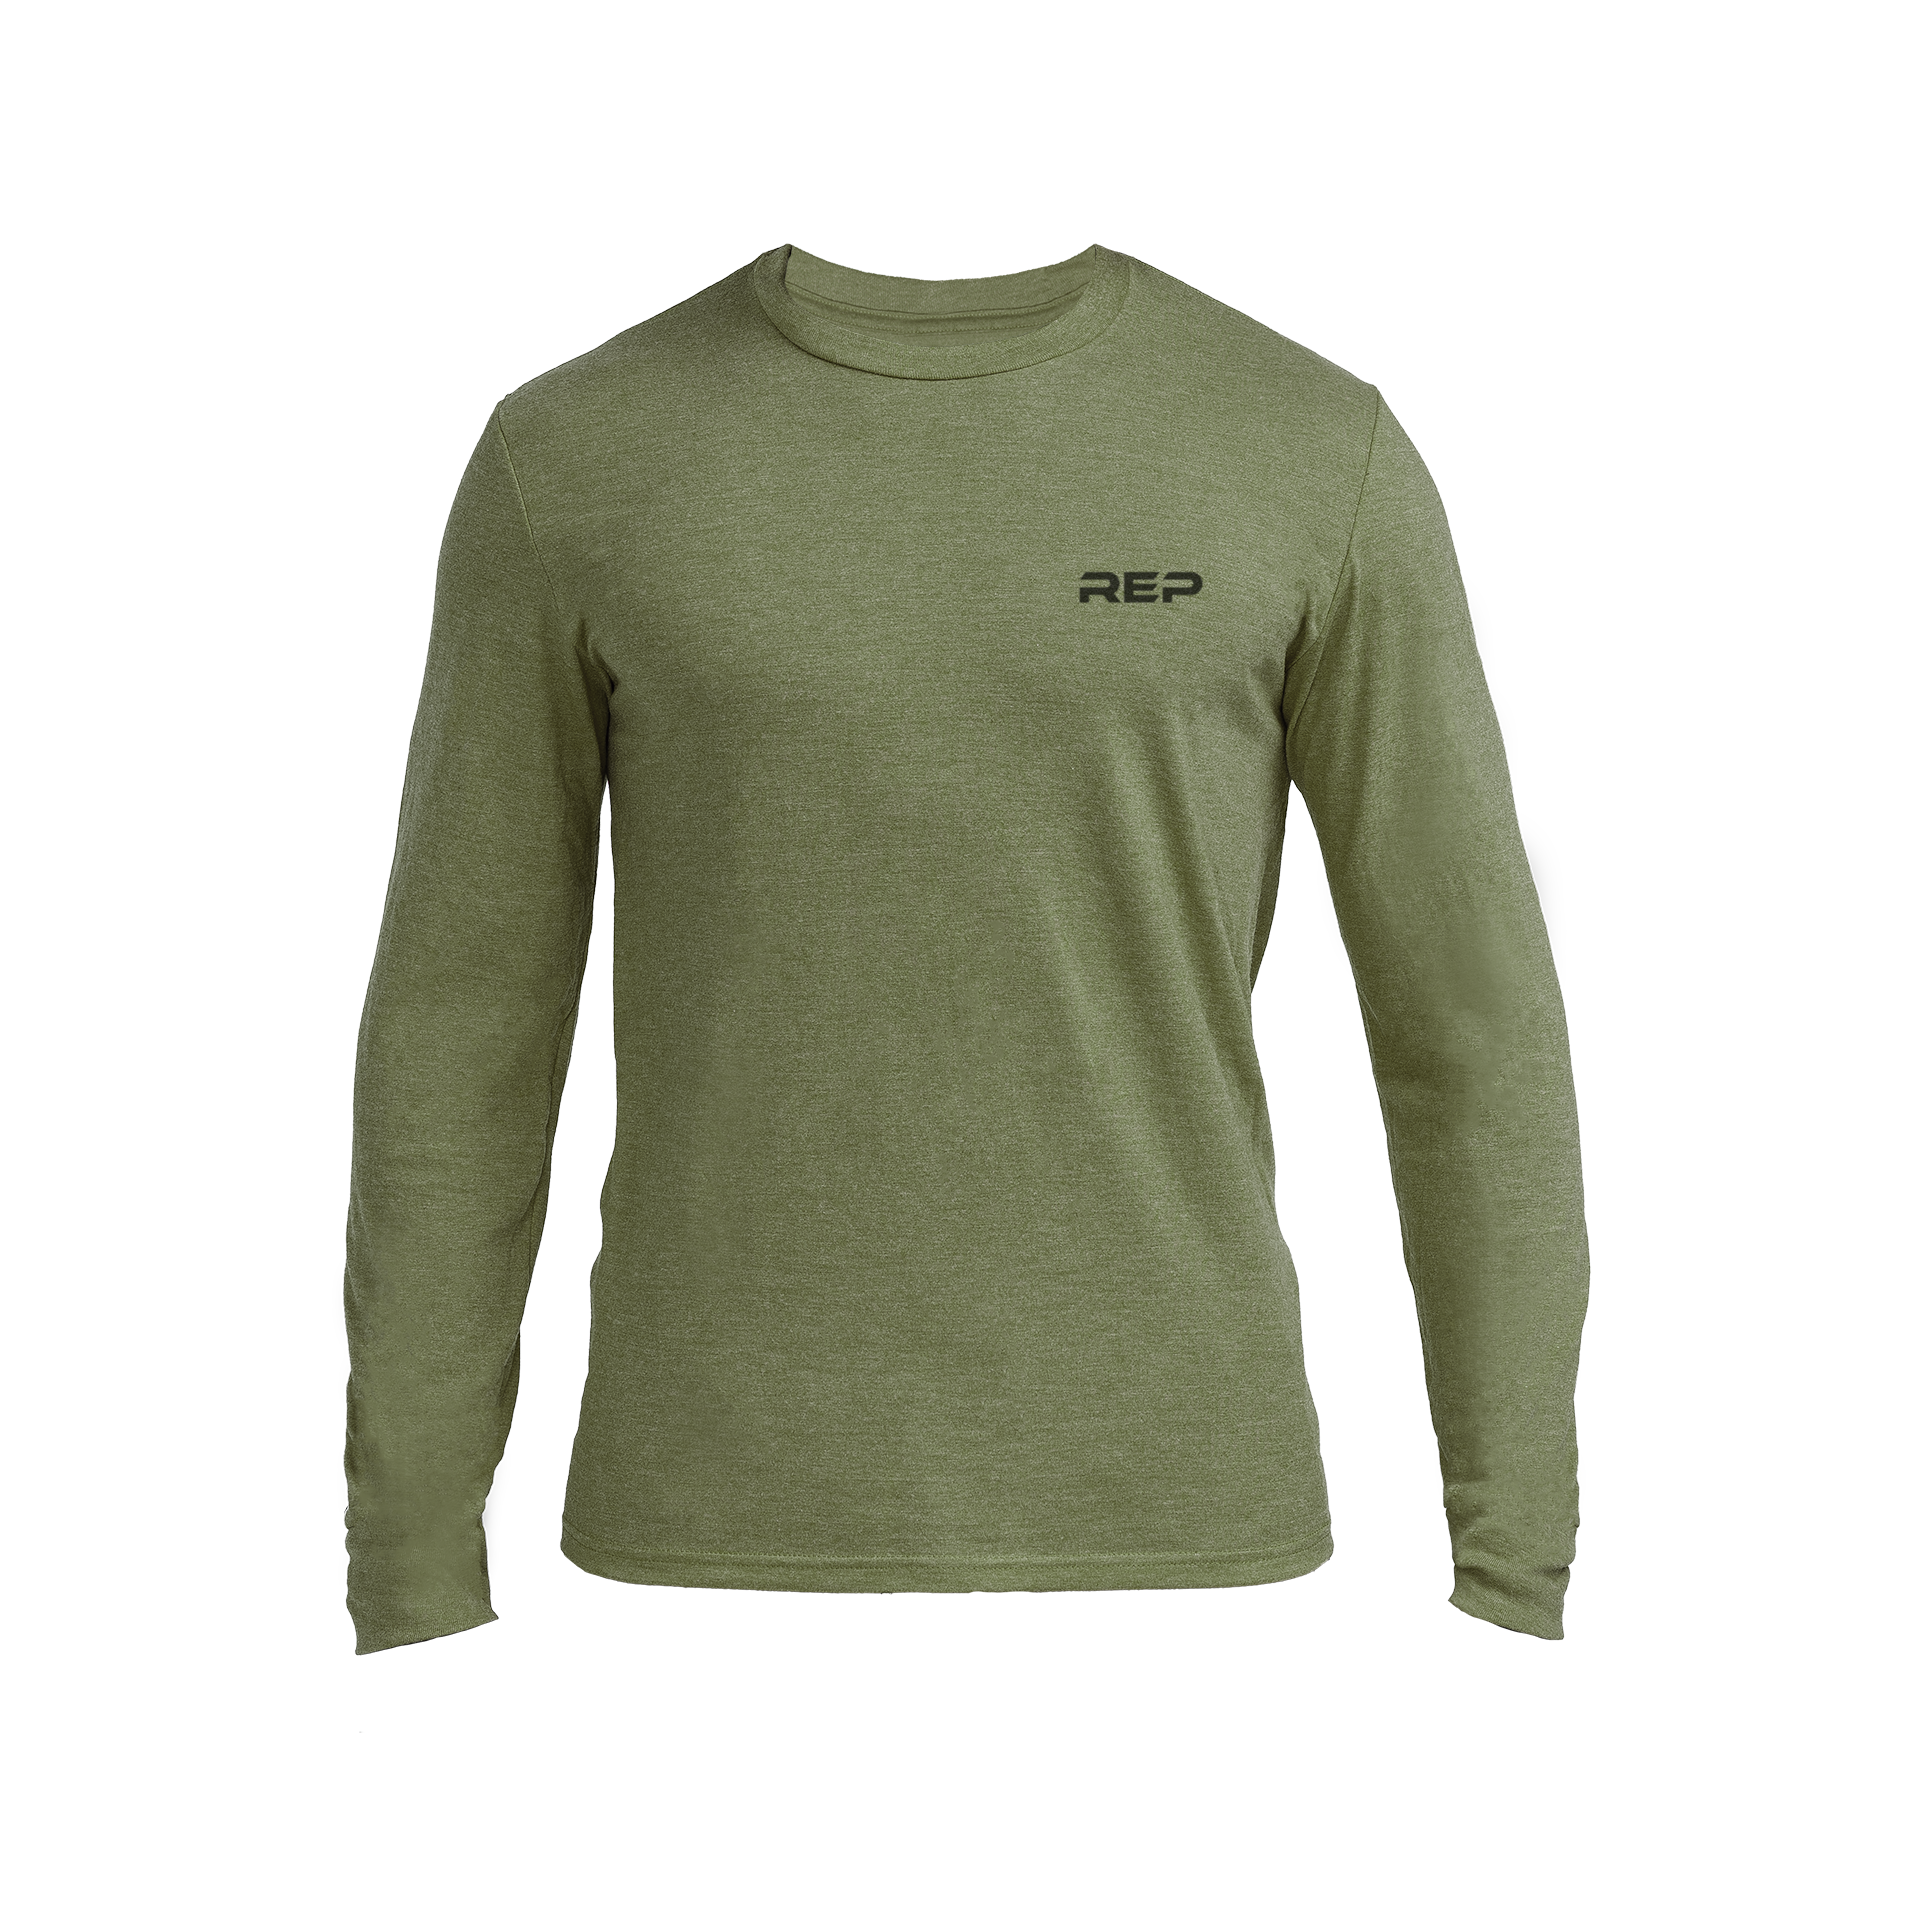 Men's REP Long-Sleeve Tri-Blend Crew - Heather Olive/Black / X-Small